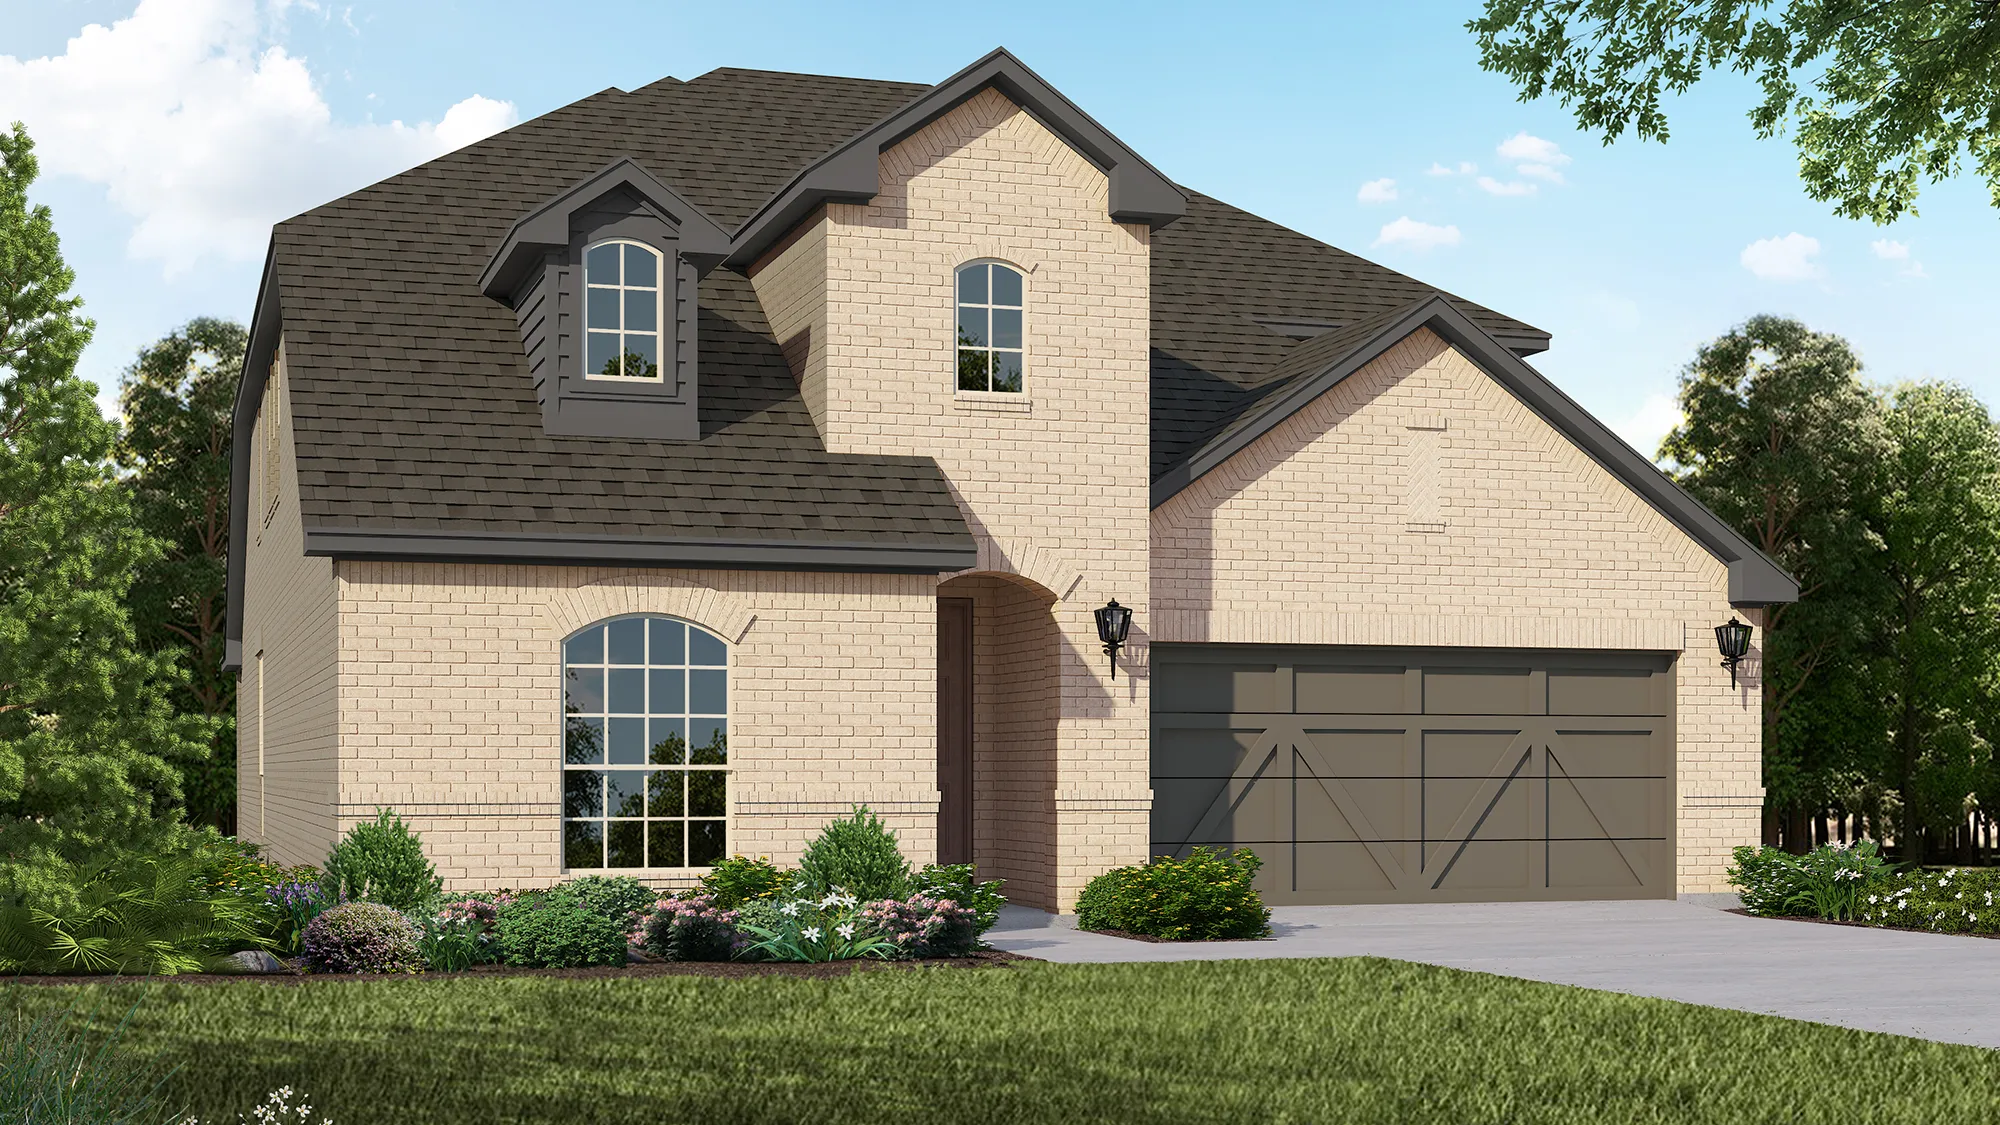 Plan 1528 Elevation A by American Legend Homes